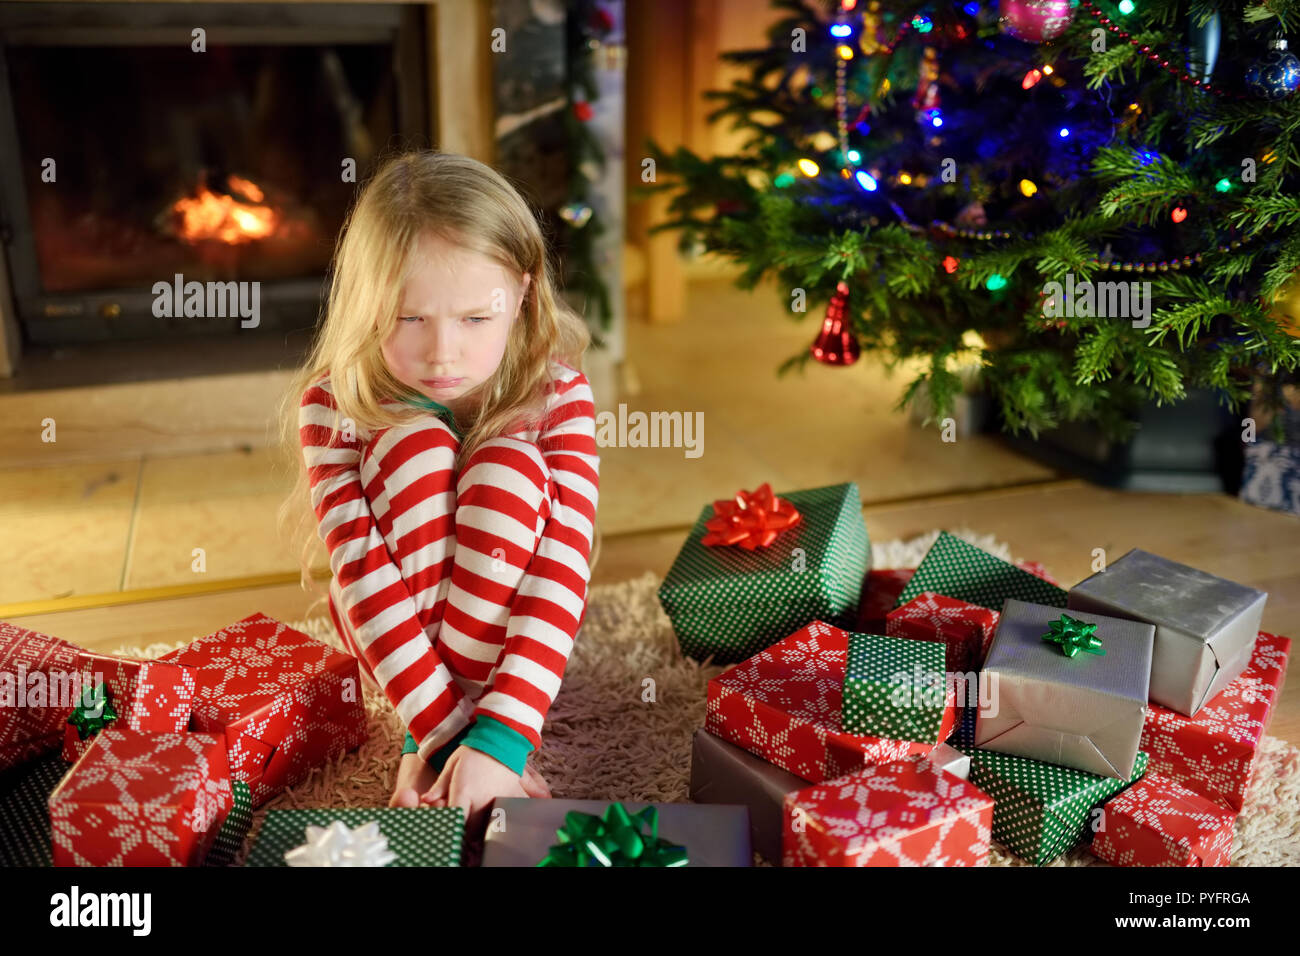 https://c8.alamy.com/comp/PYFRGA/cute-little-girl-feeling-unhappy-with-her-christmas-gifts-child-sitting-by-a-fireplace-in-a-cozy-dark-living-room-on-xmas-eve-too-many-presents-for-PYFRGA.jpg